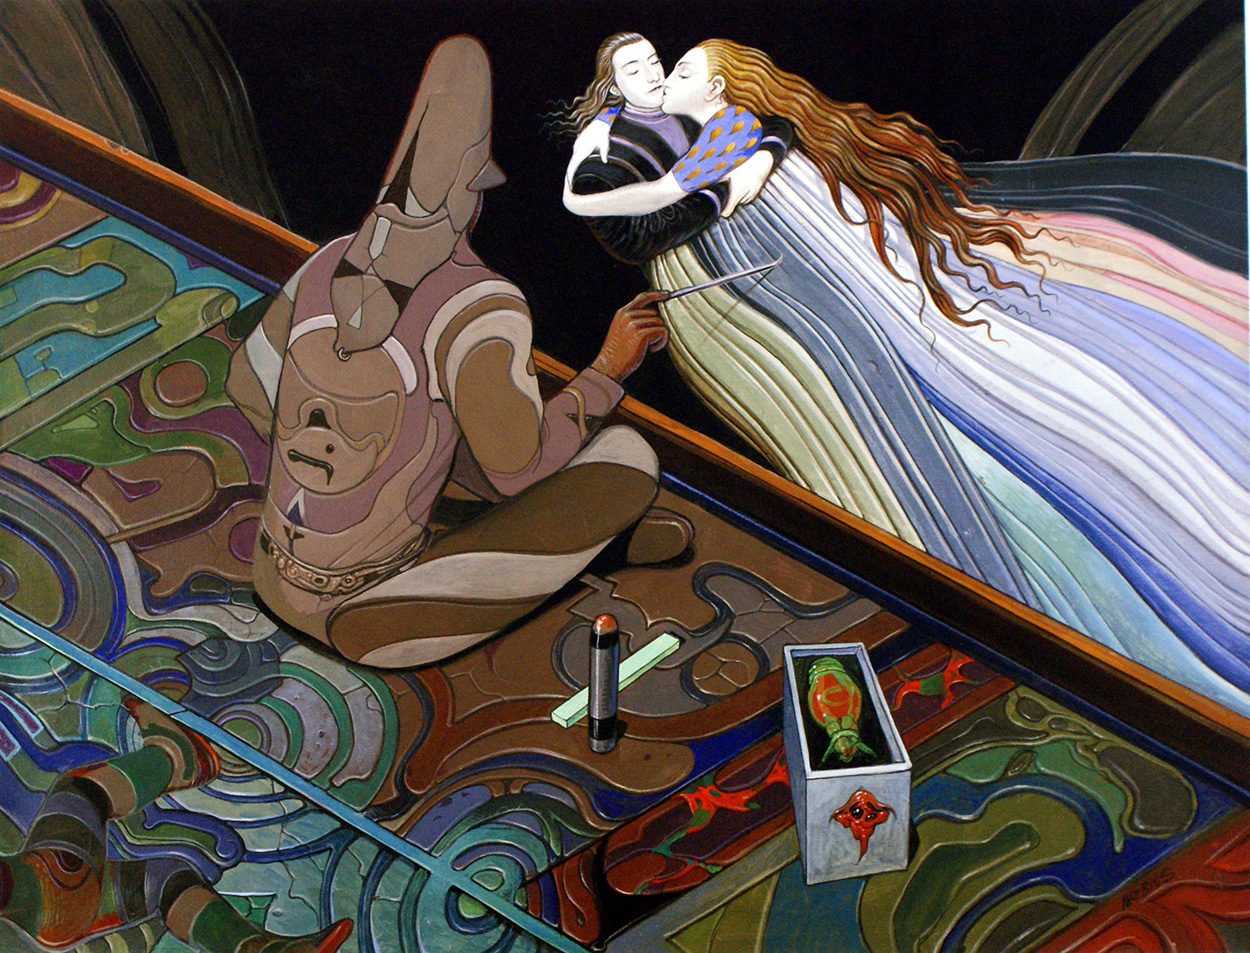 Le Bal des Musiciens (Limited Edition Print) art by Moebius (Jean Giraud) Art at The Illustration Art Gallery